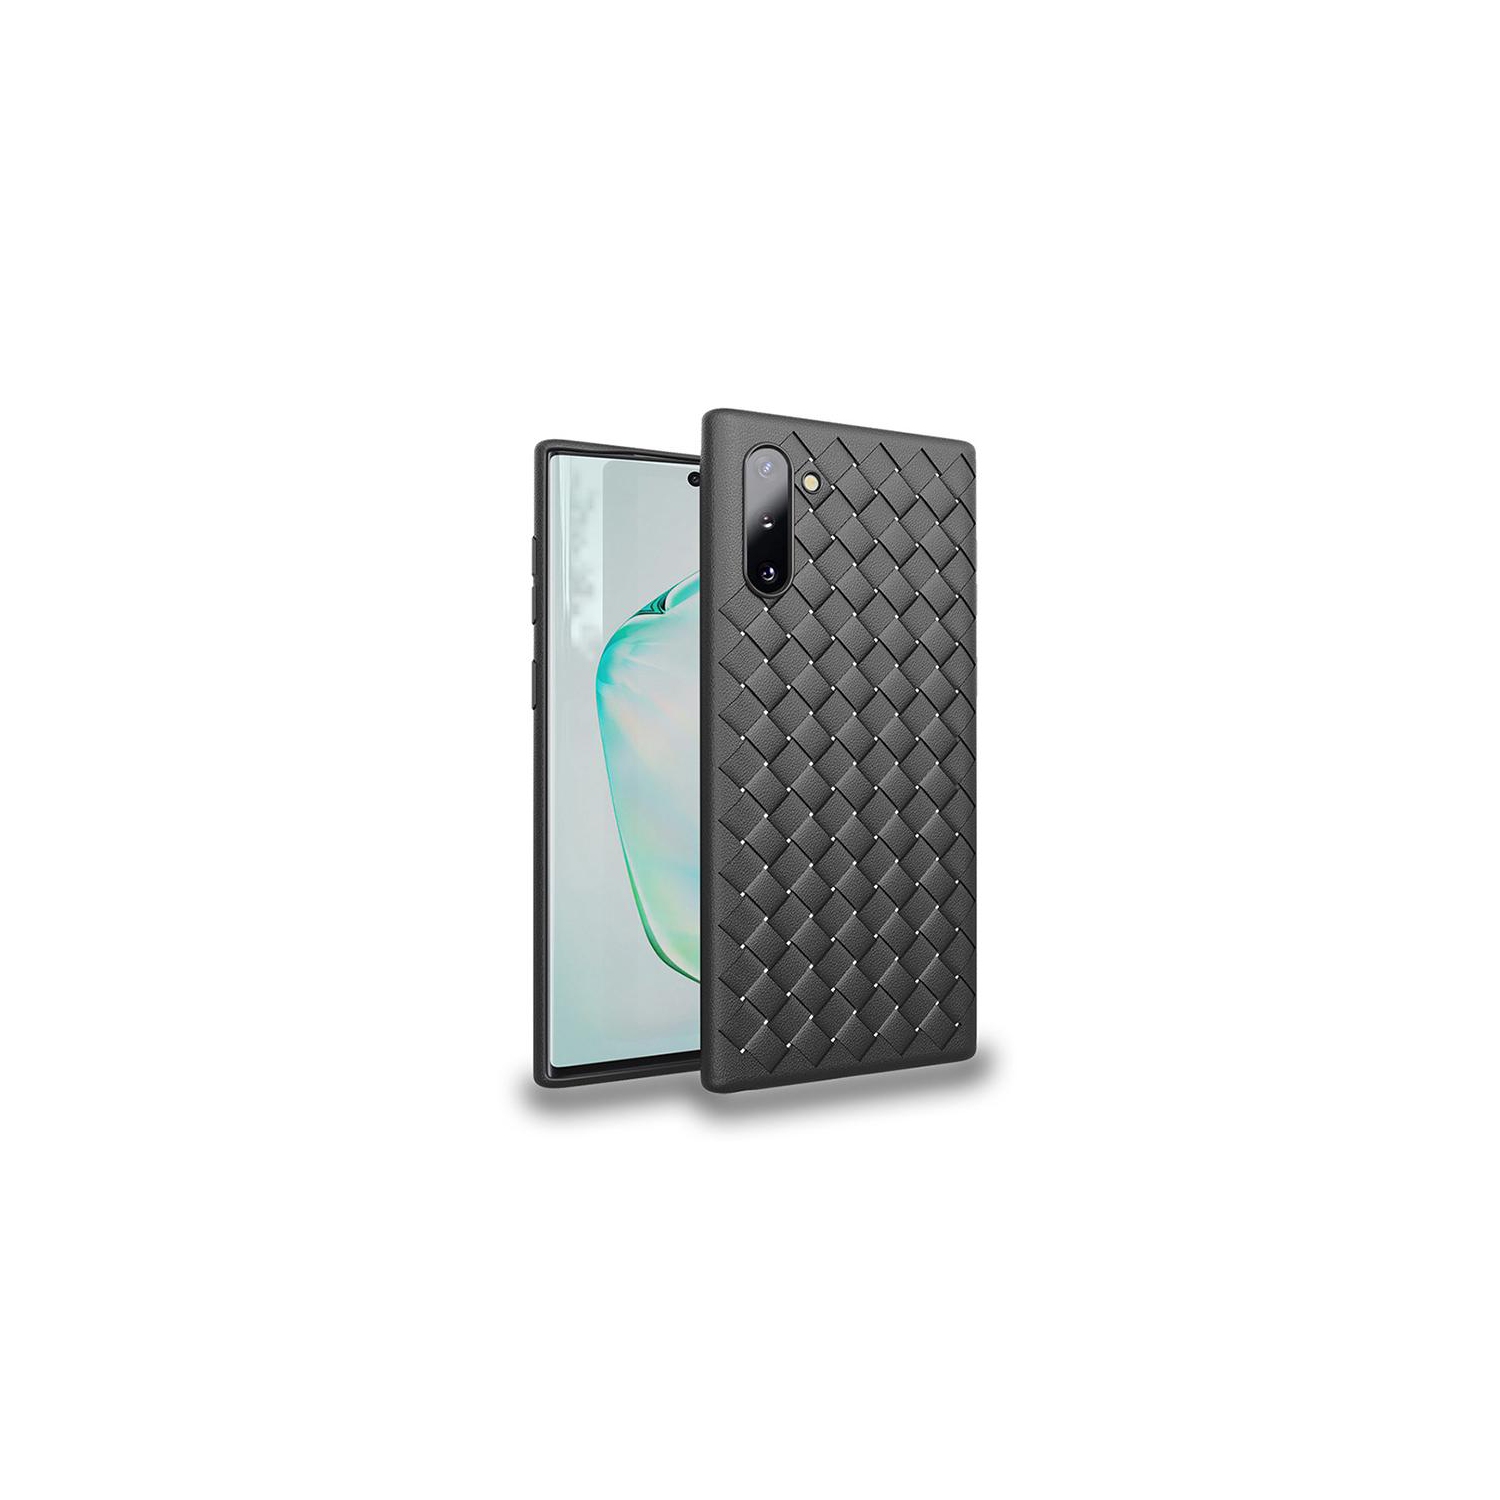 PANDACO Black Leather Cross-Weave Case for Samsung Galaxy Note 10